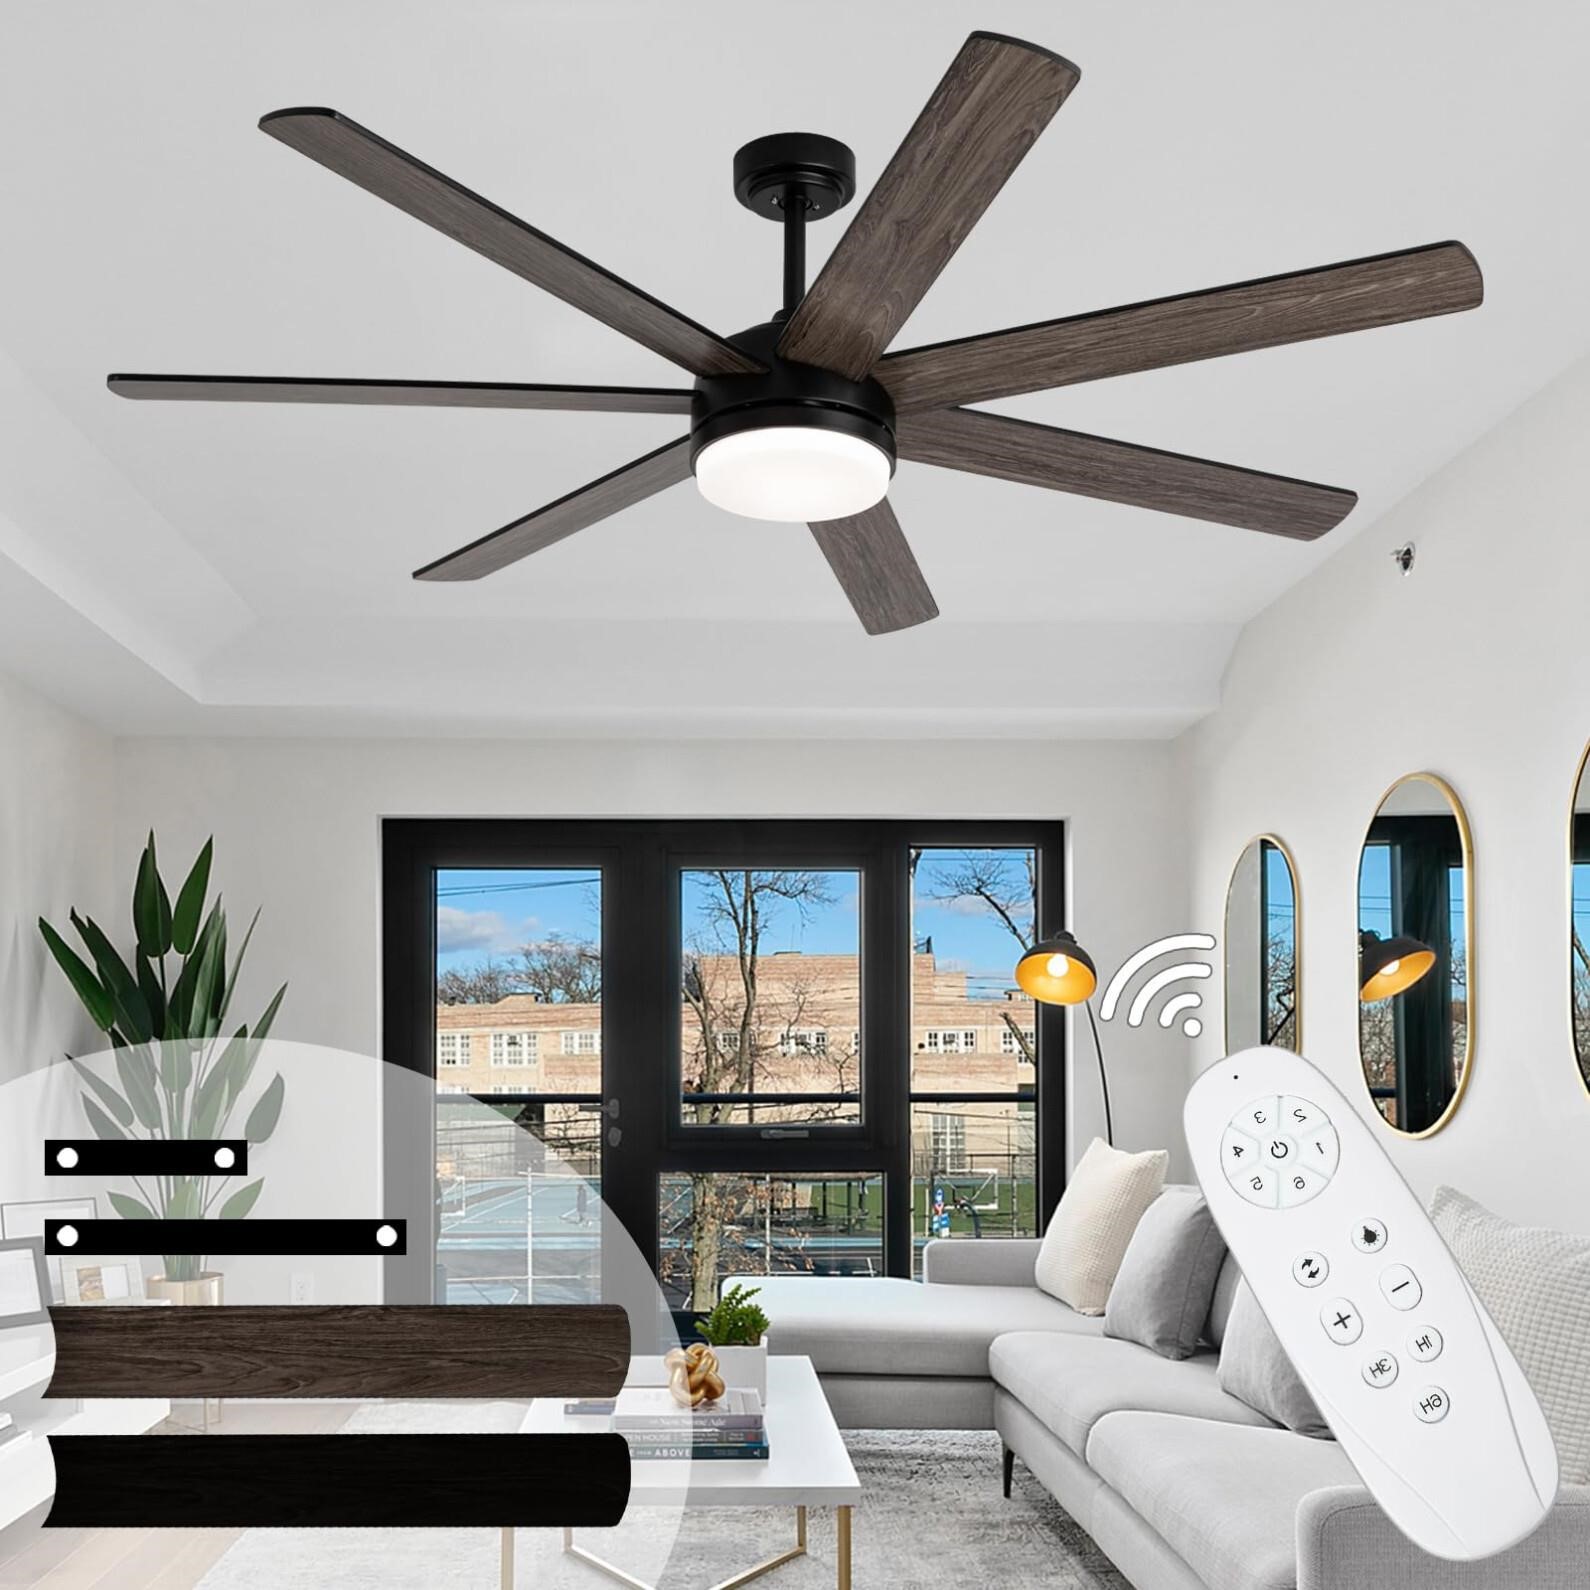 Viossn Ceiling Fans with Lights and Remote, 72 Inc